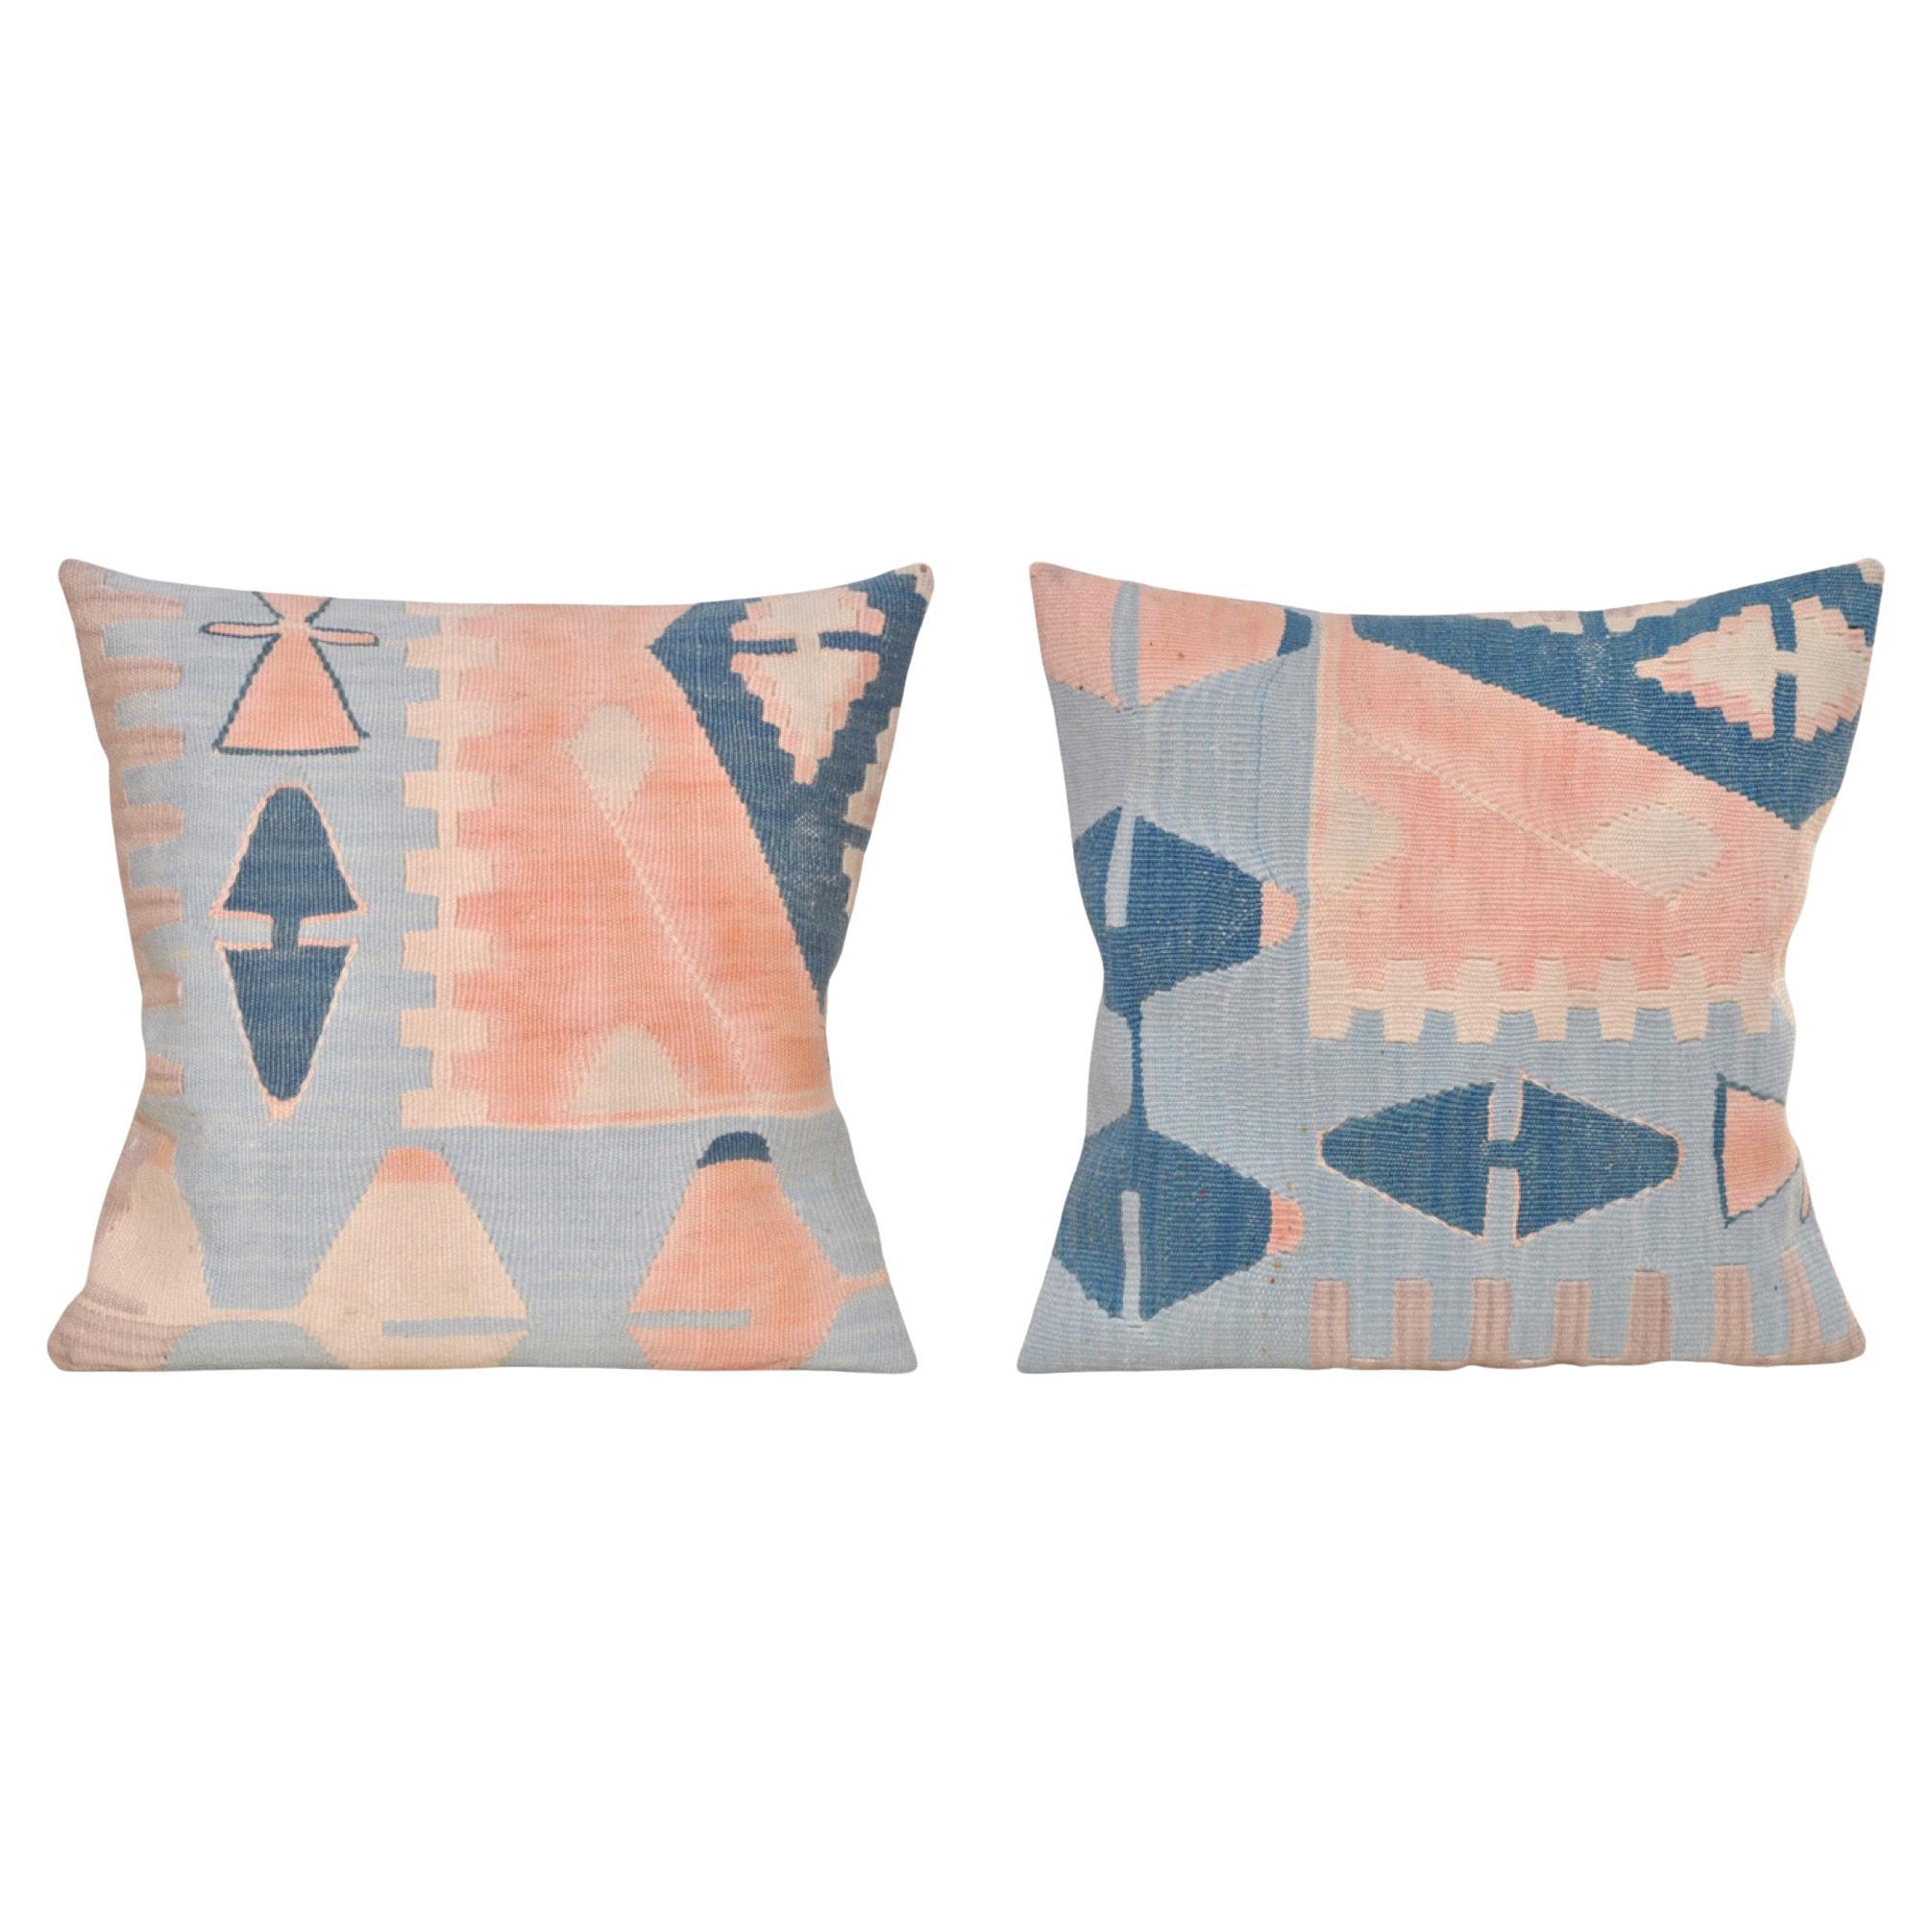 Pair of Vintage Kilim Rug Pillow with Irish Linen Blue Blush Pink For Sale